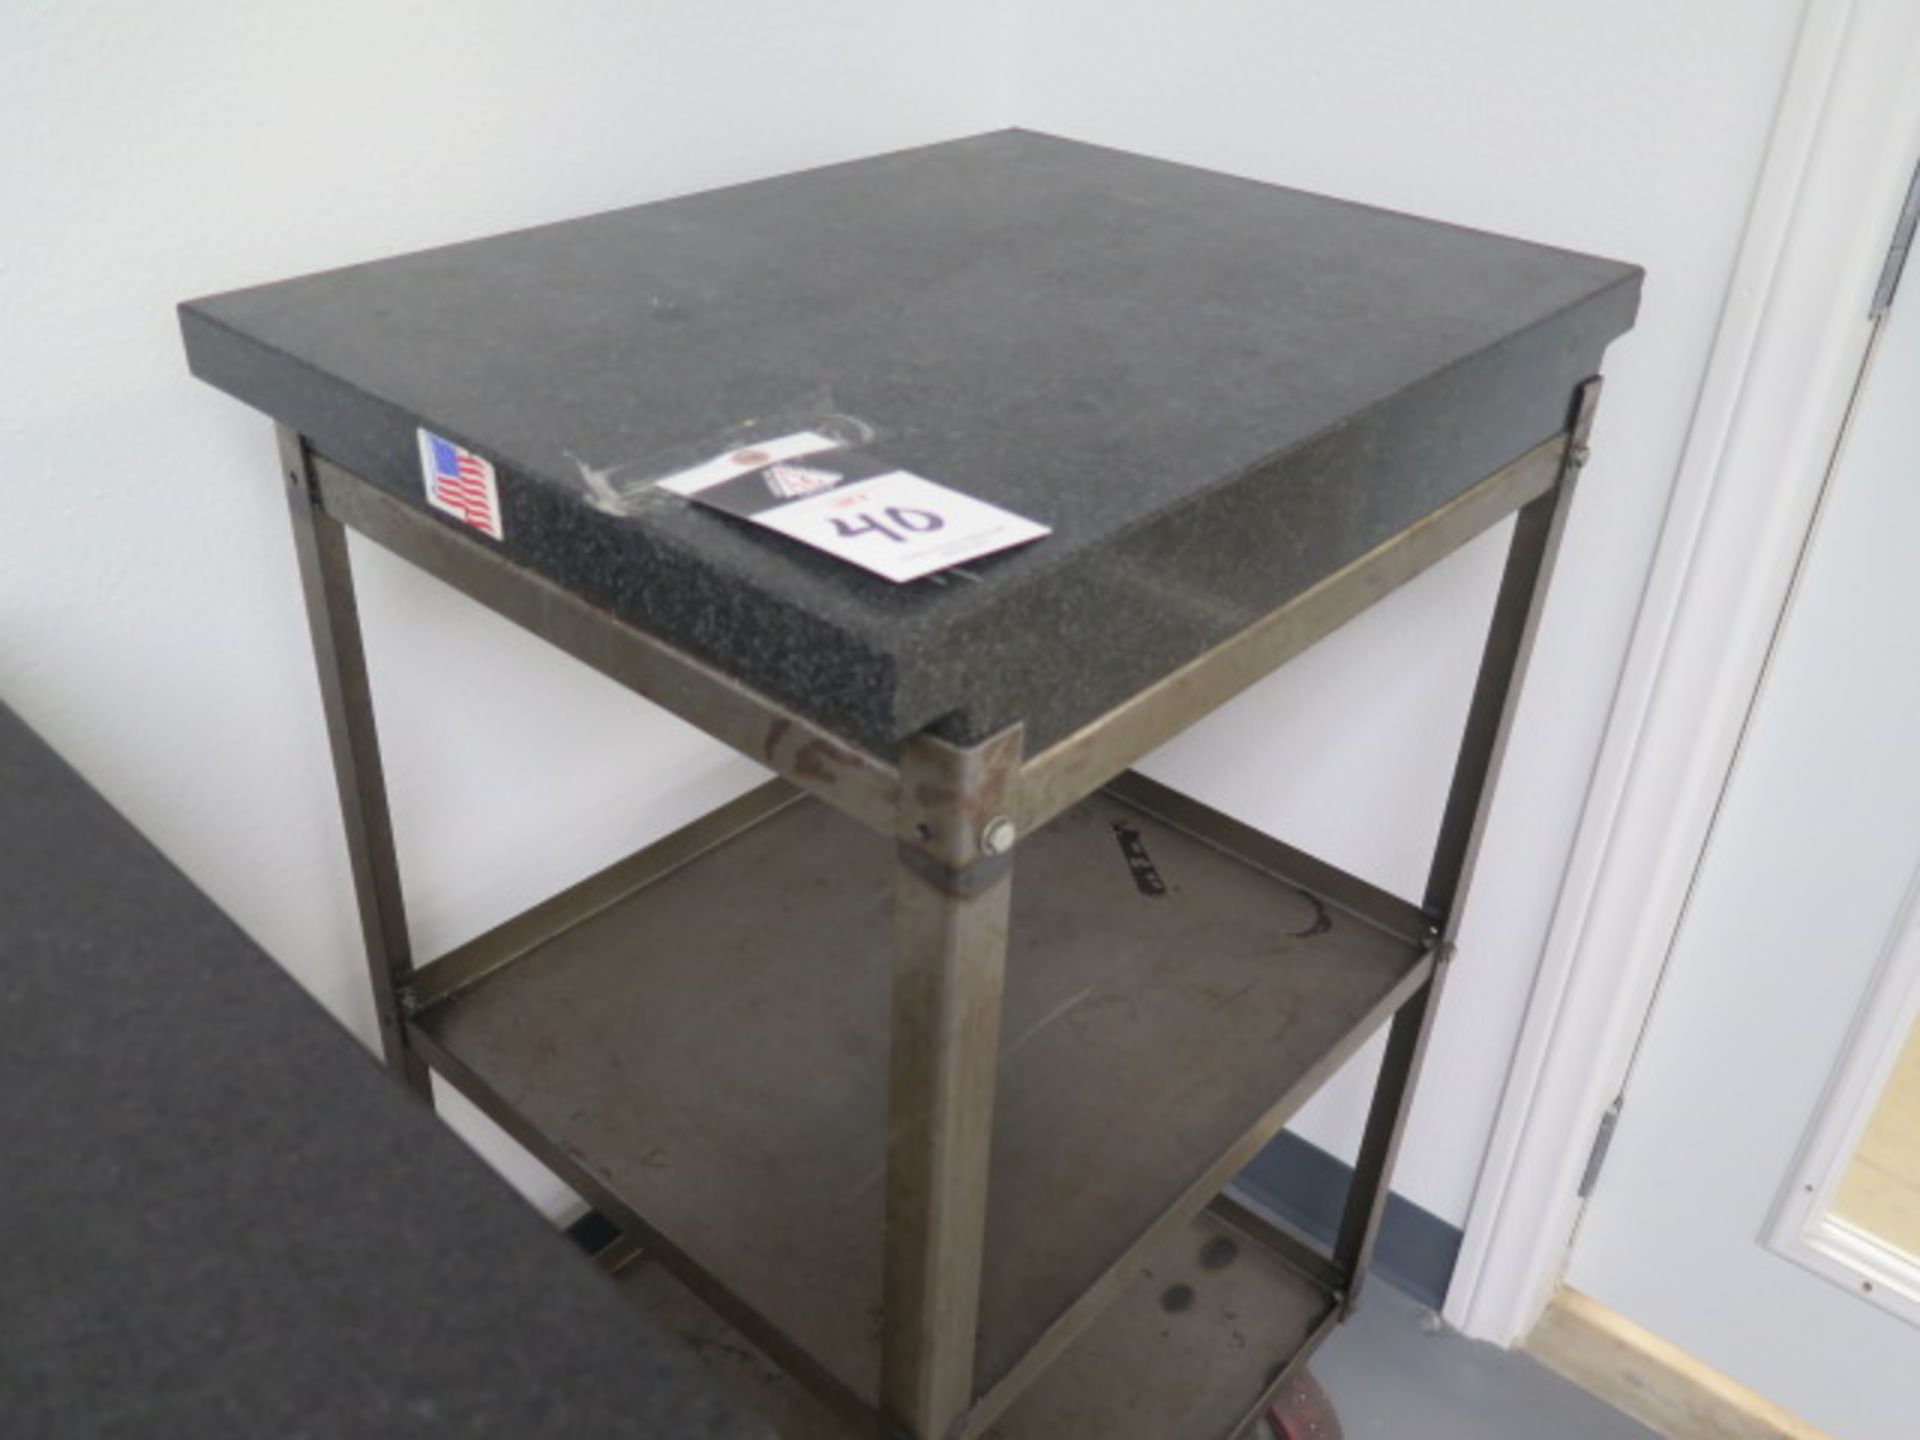 18" x 24" x 4" 2-Ledge Granite Surface Plate w/ Roll Stand (SOLD AS-IS - NO WARRANTY) - Image 2 of 4